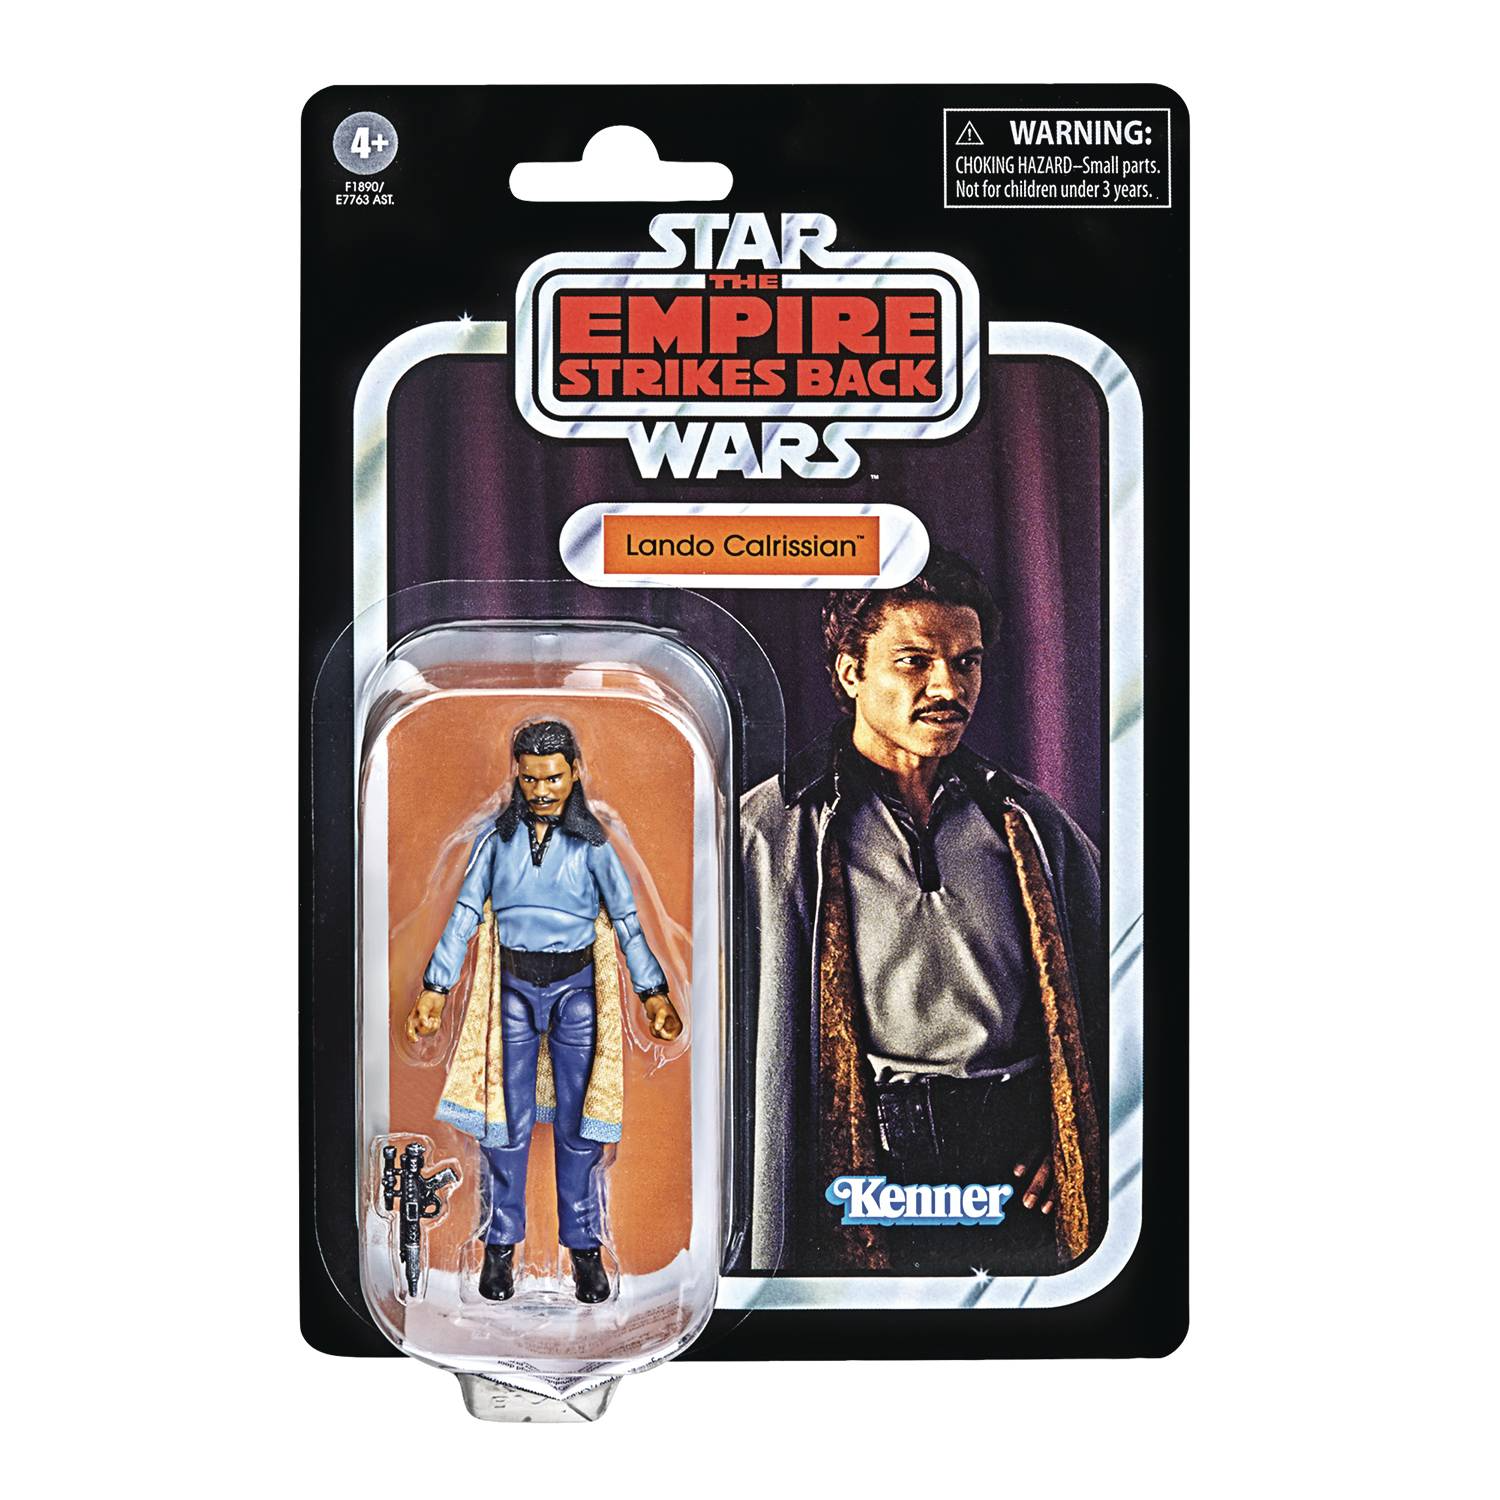 Star Wars - The Vintage Collection - Empire Strikes Back - Lando Calrissian 3.75inch Action Figure